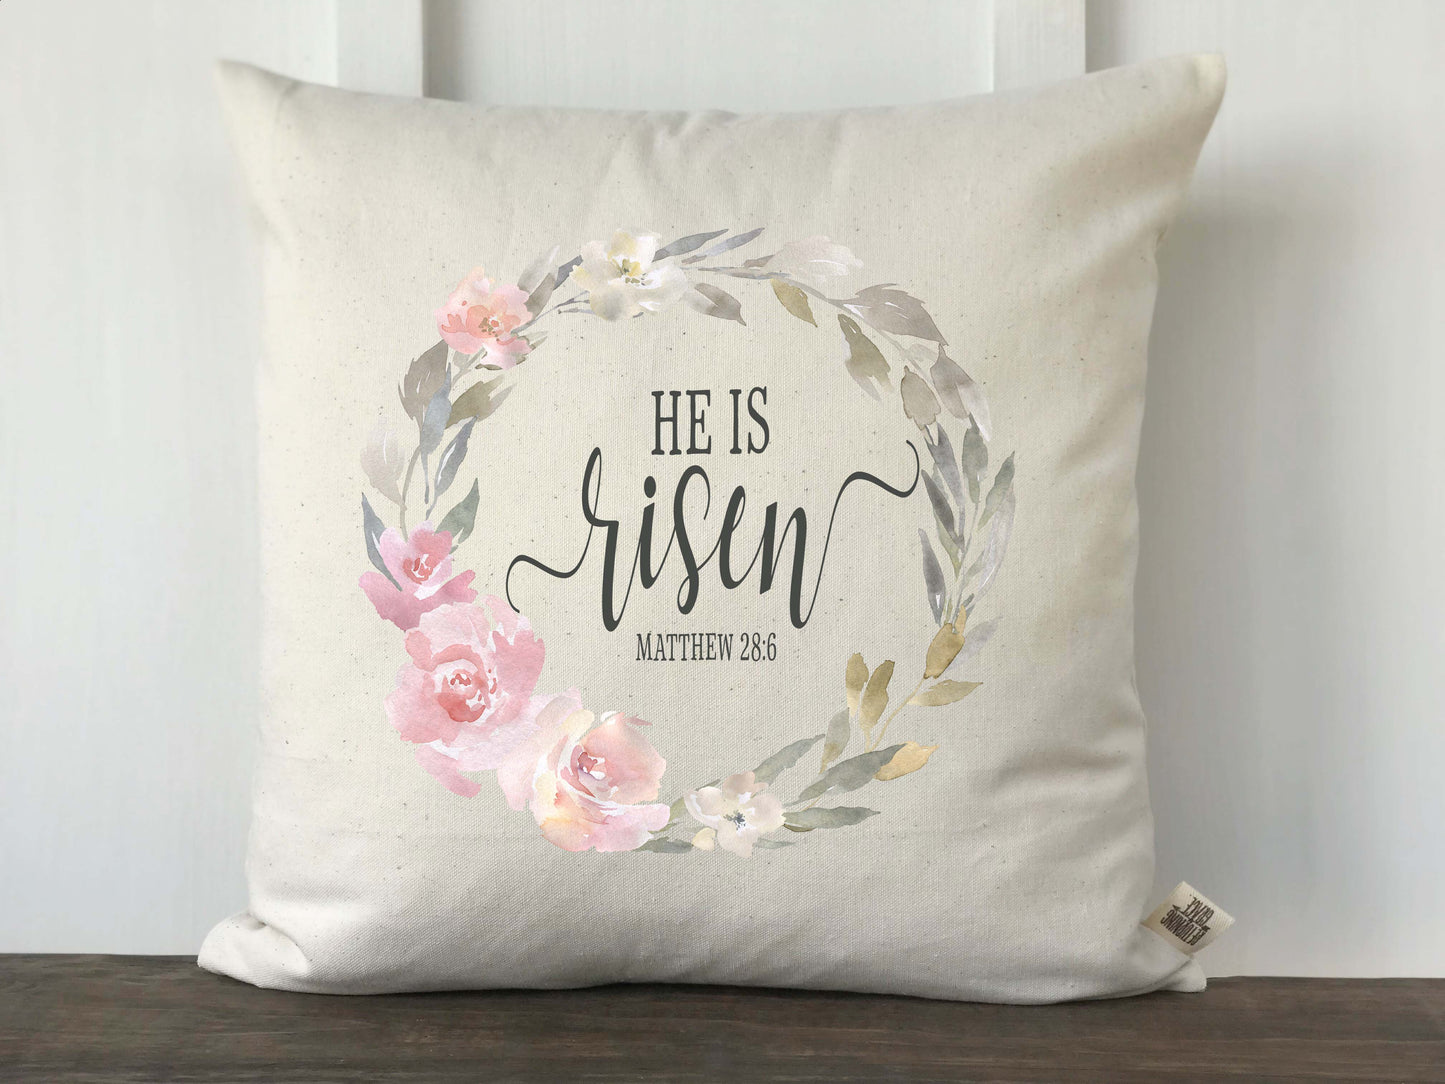 He Is Risen Matthew 28:6 Pink and Gray Wreath Pillow Cover - Returning Grace Designs